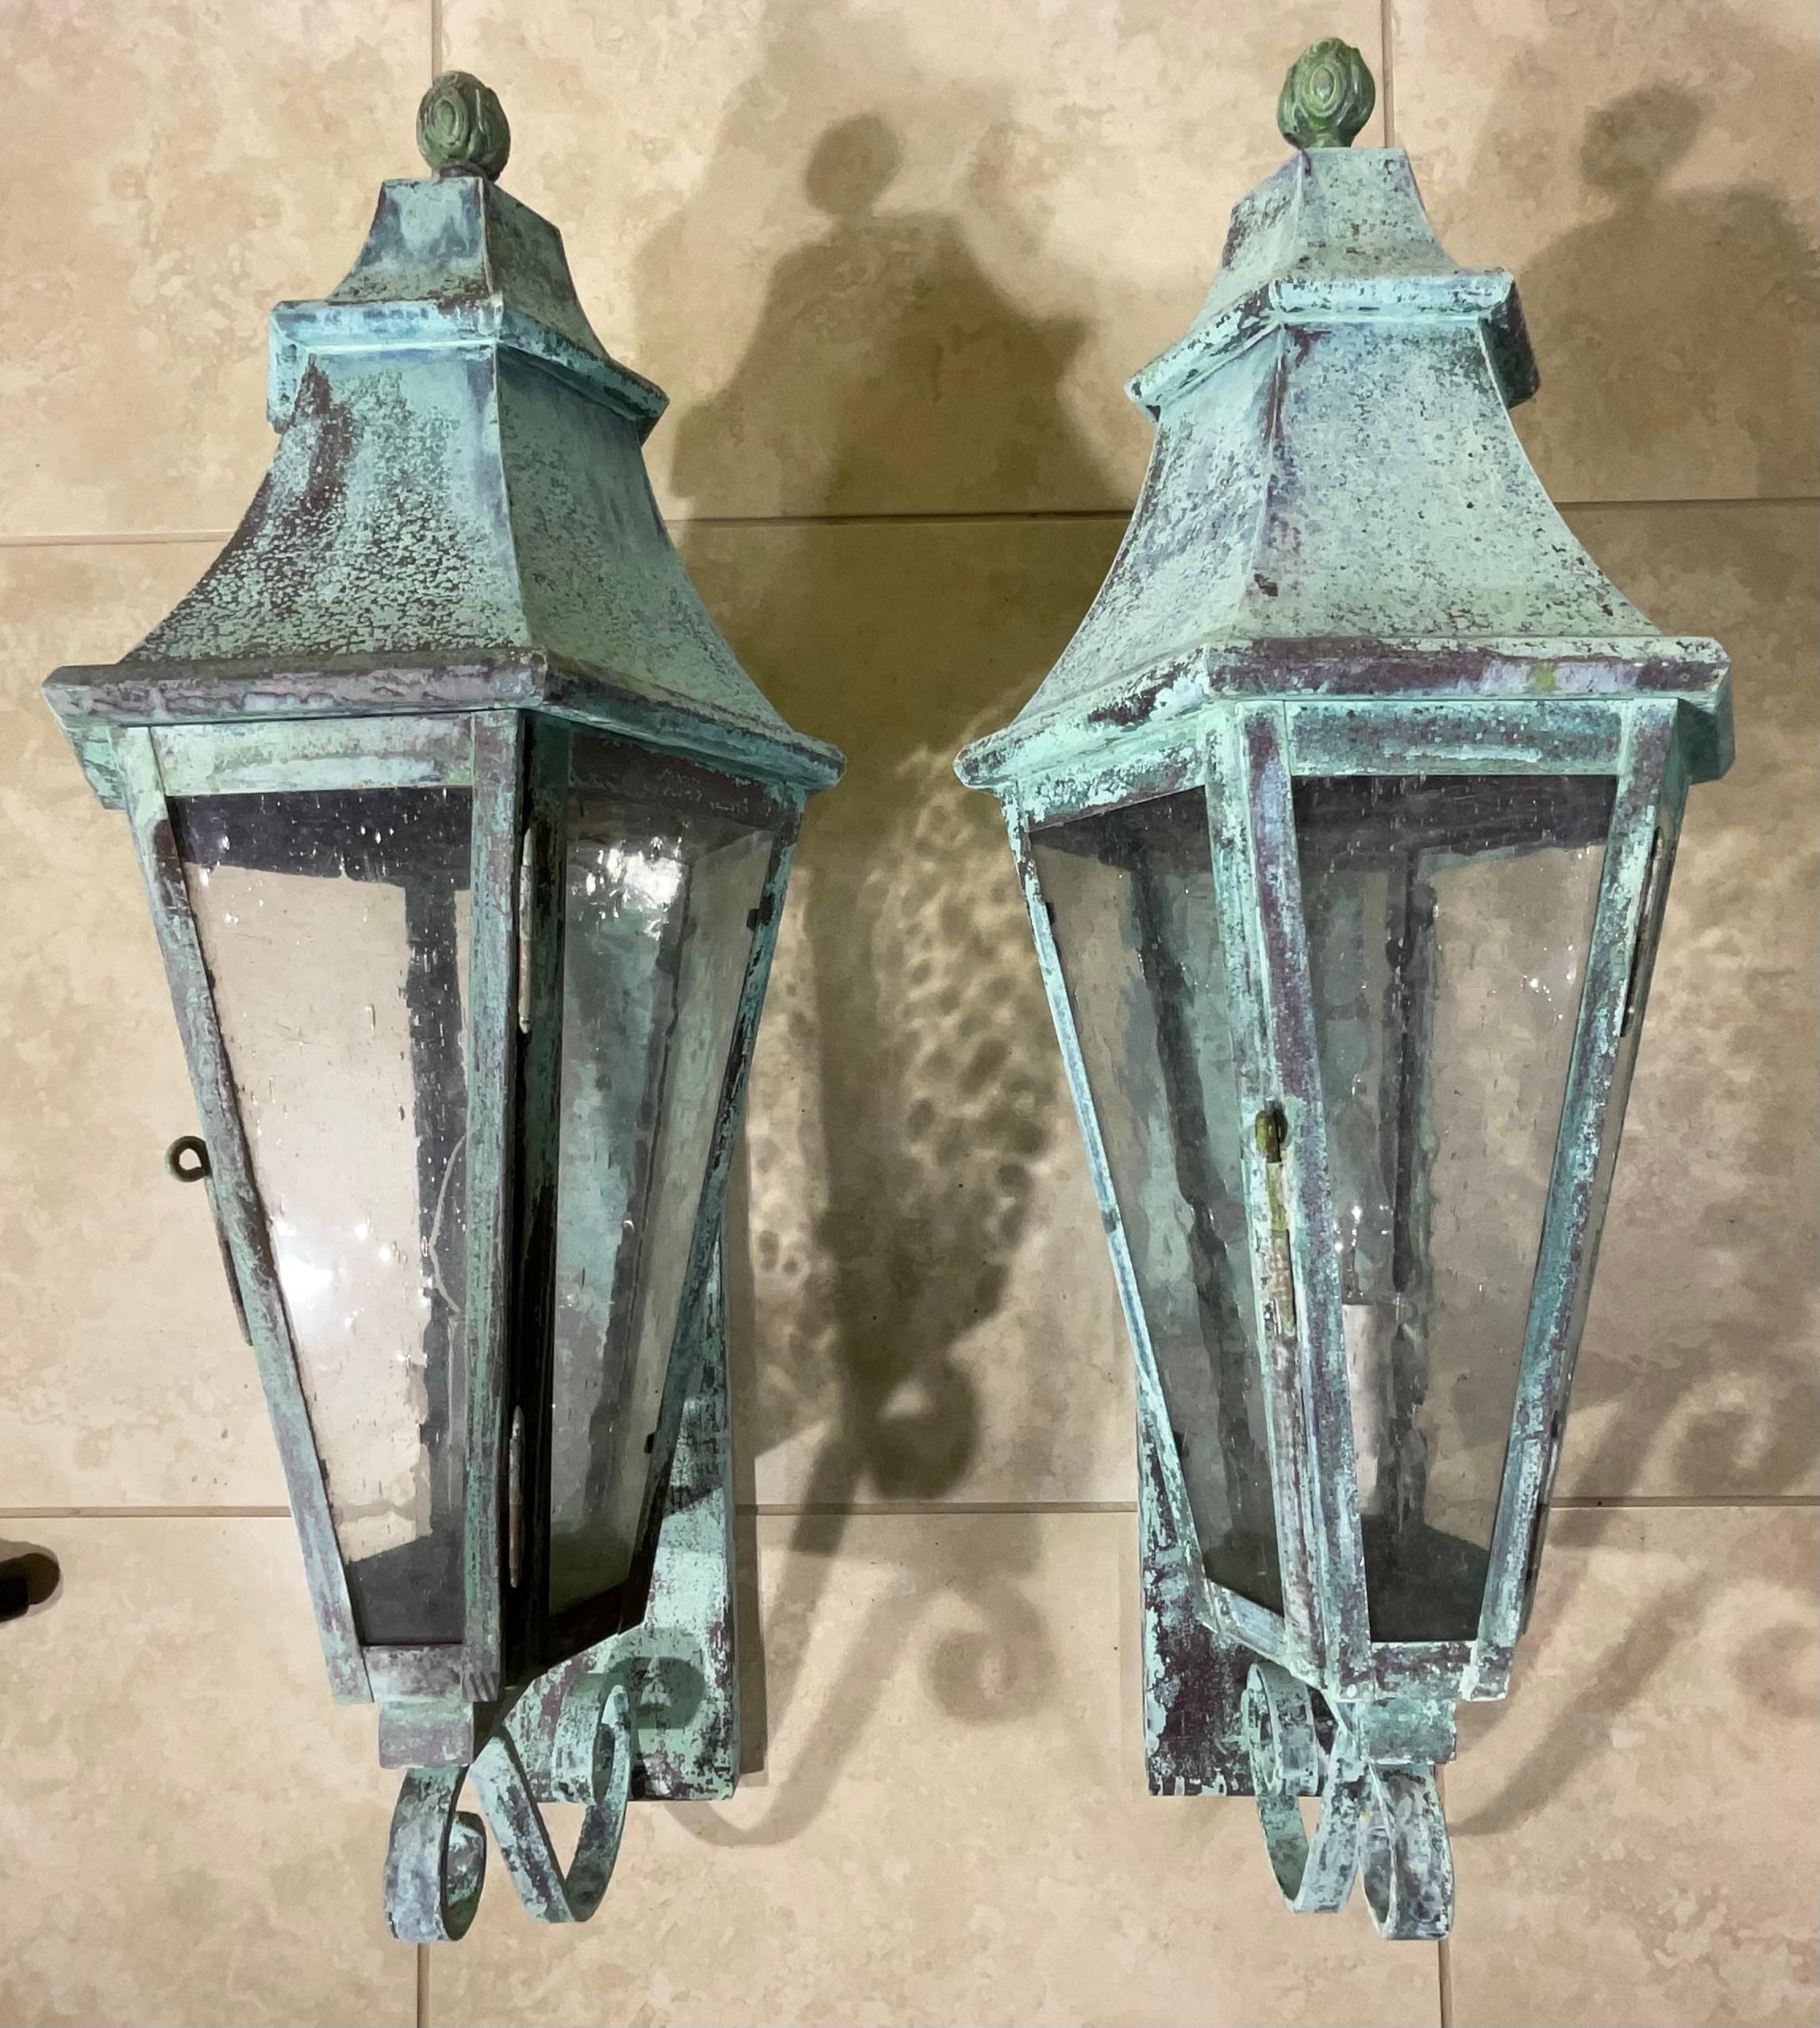 Elegant  Pair of vintage wall lantern, seeded texture glass, made of solid copper beautiful patina, one 60/watt  light each lantern, suitable for wet location,
Decorative pair.
Backplate size 19” x 4”.5